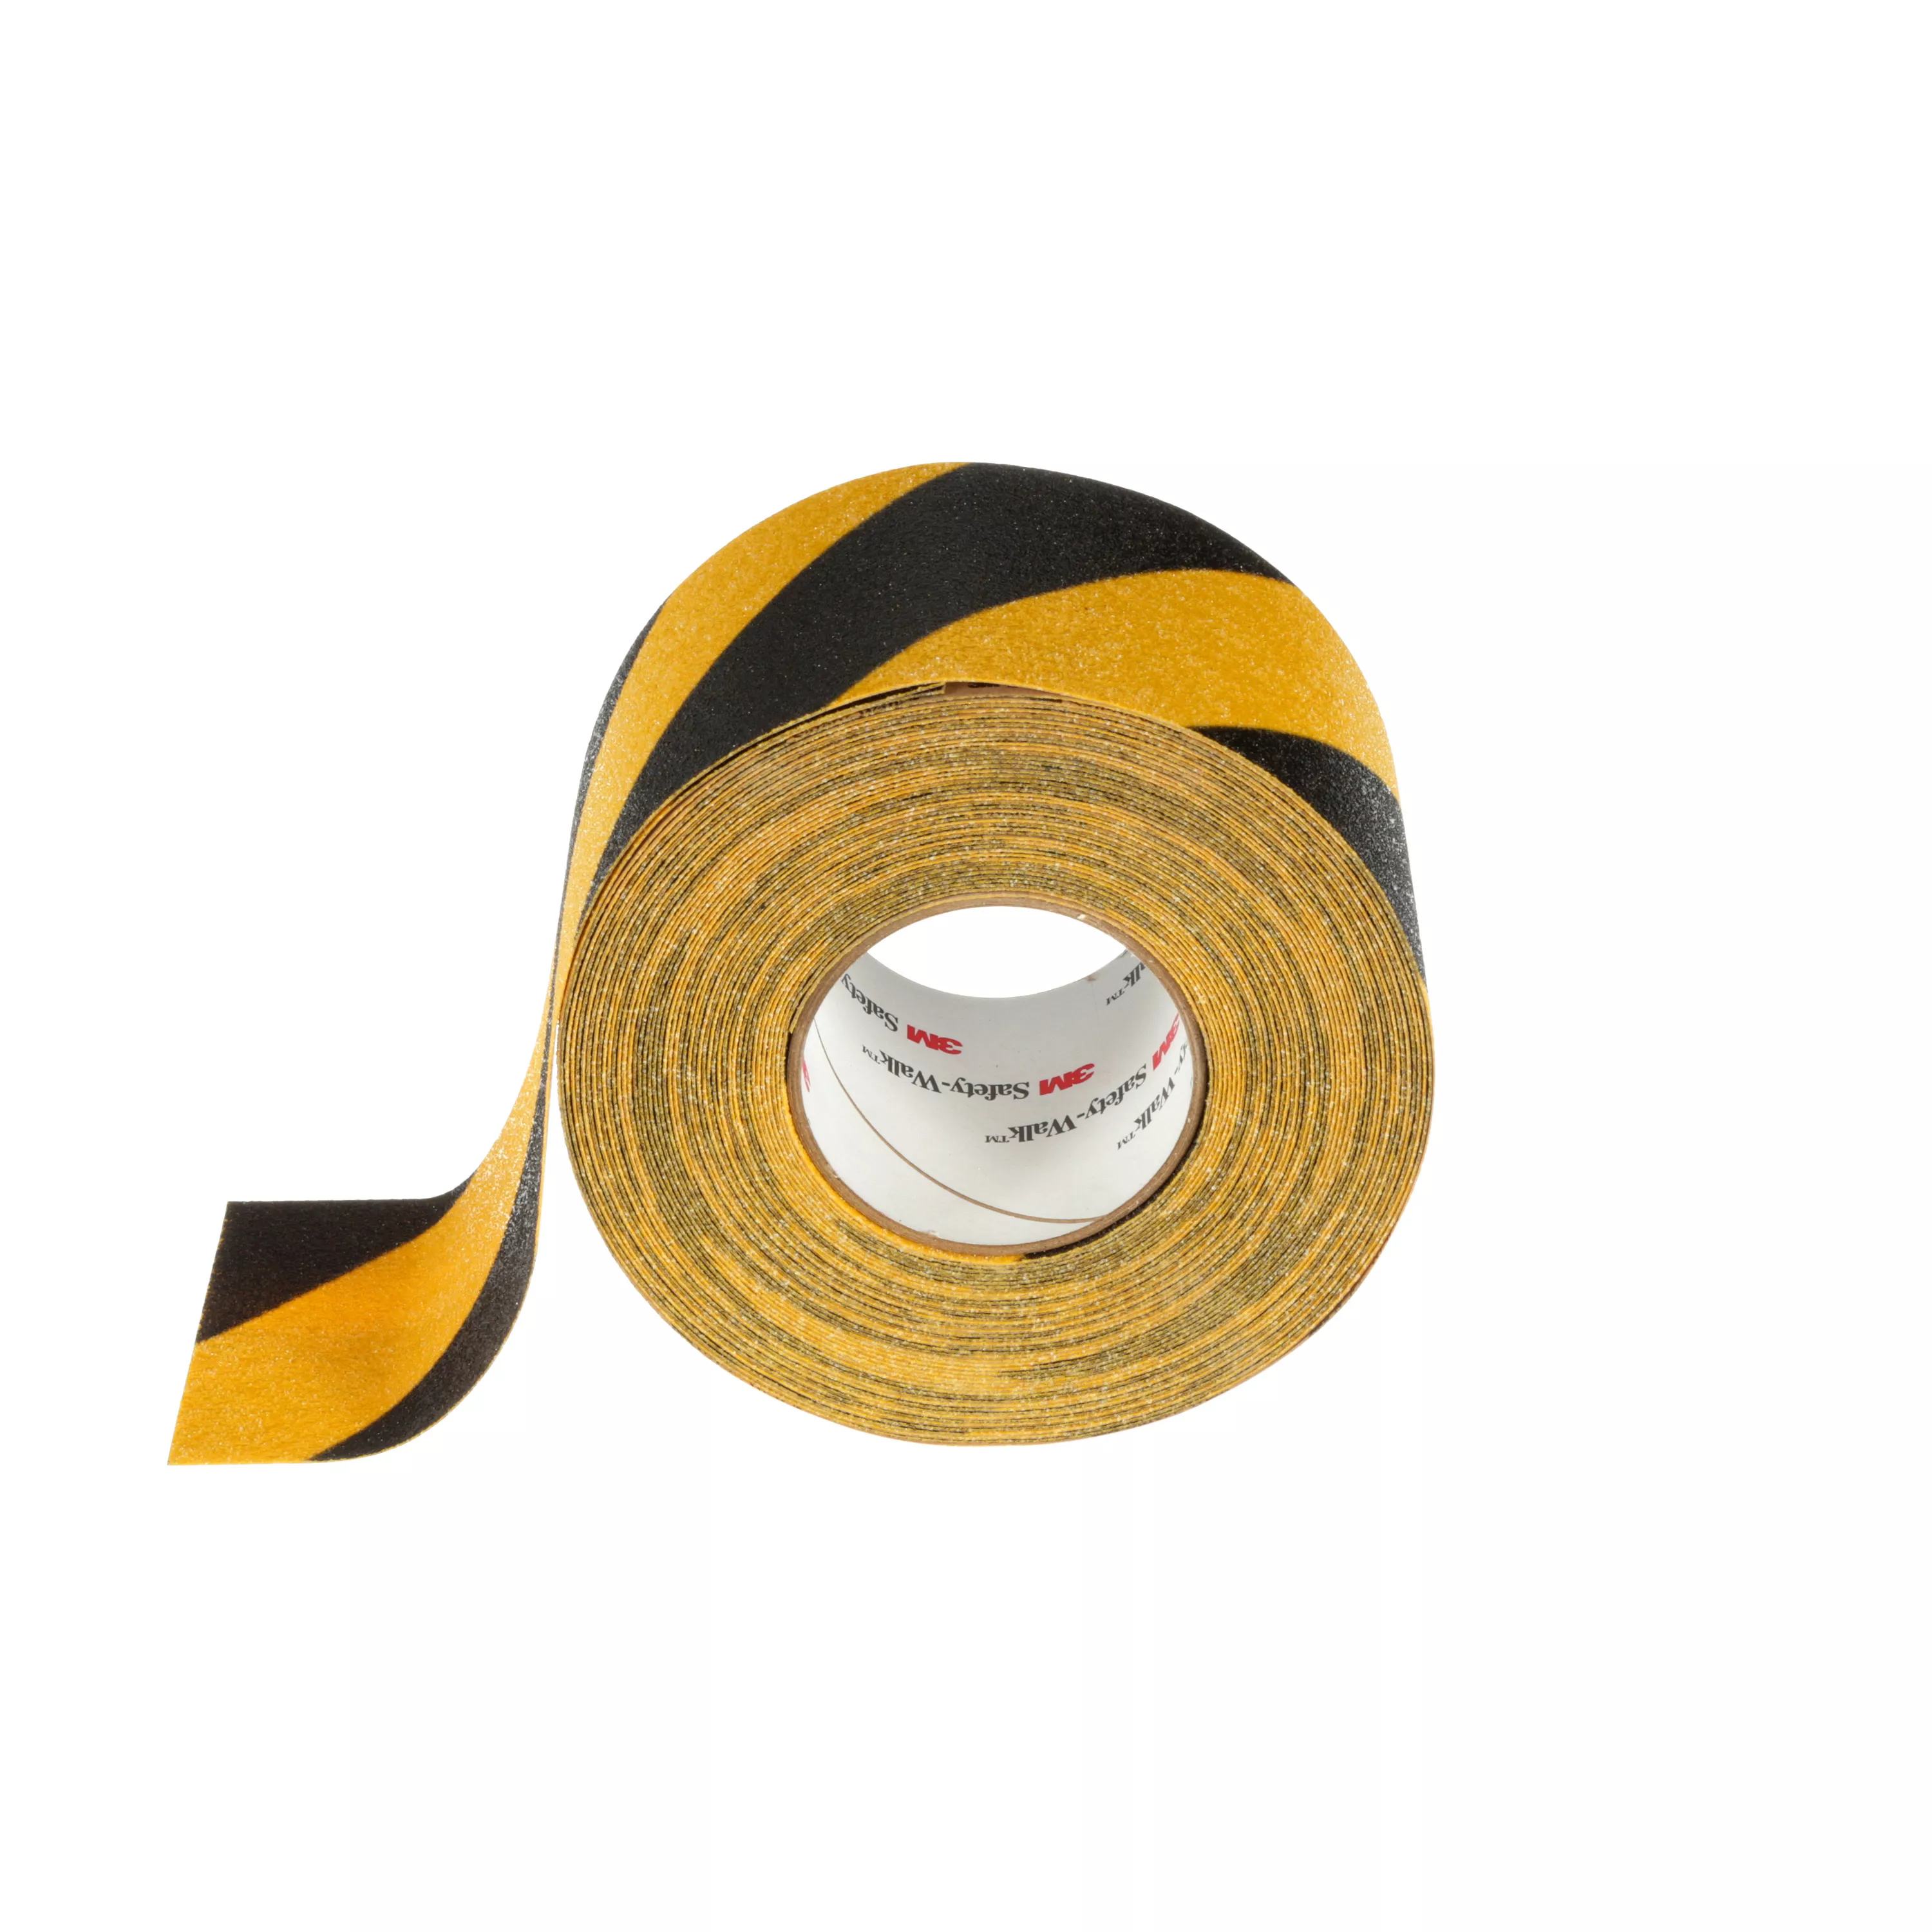 Product Number 613 | 3M™ Safety-Walk™ Slip-Resistant General Purpose Tapes & Treads 613